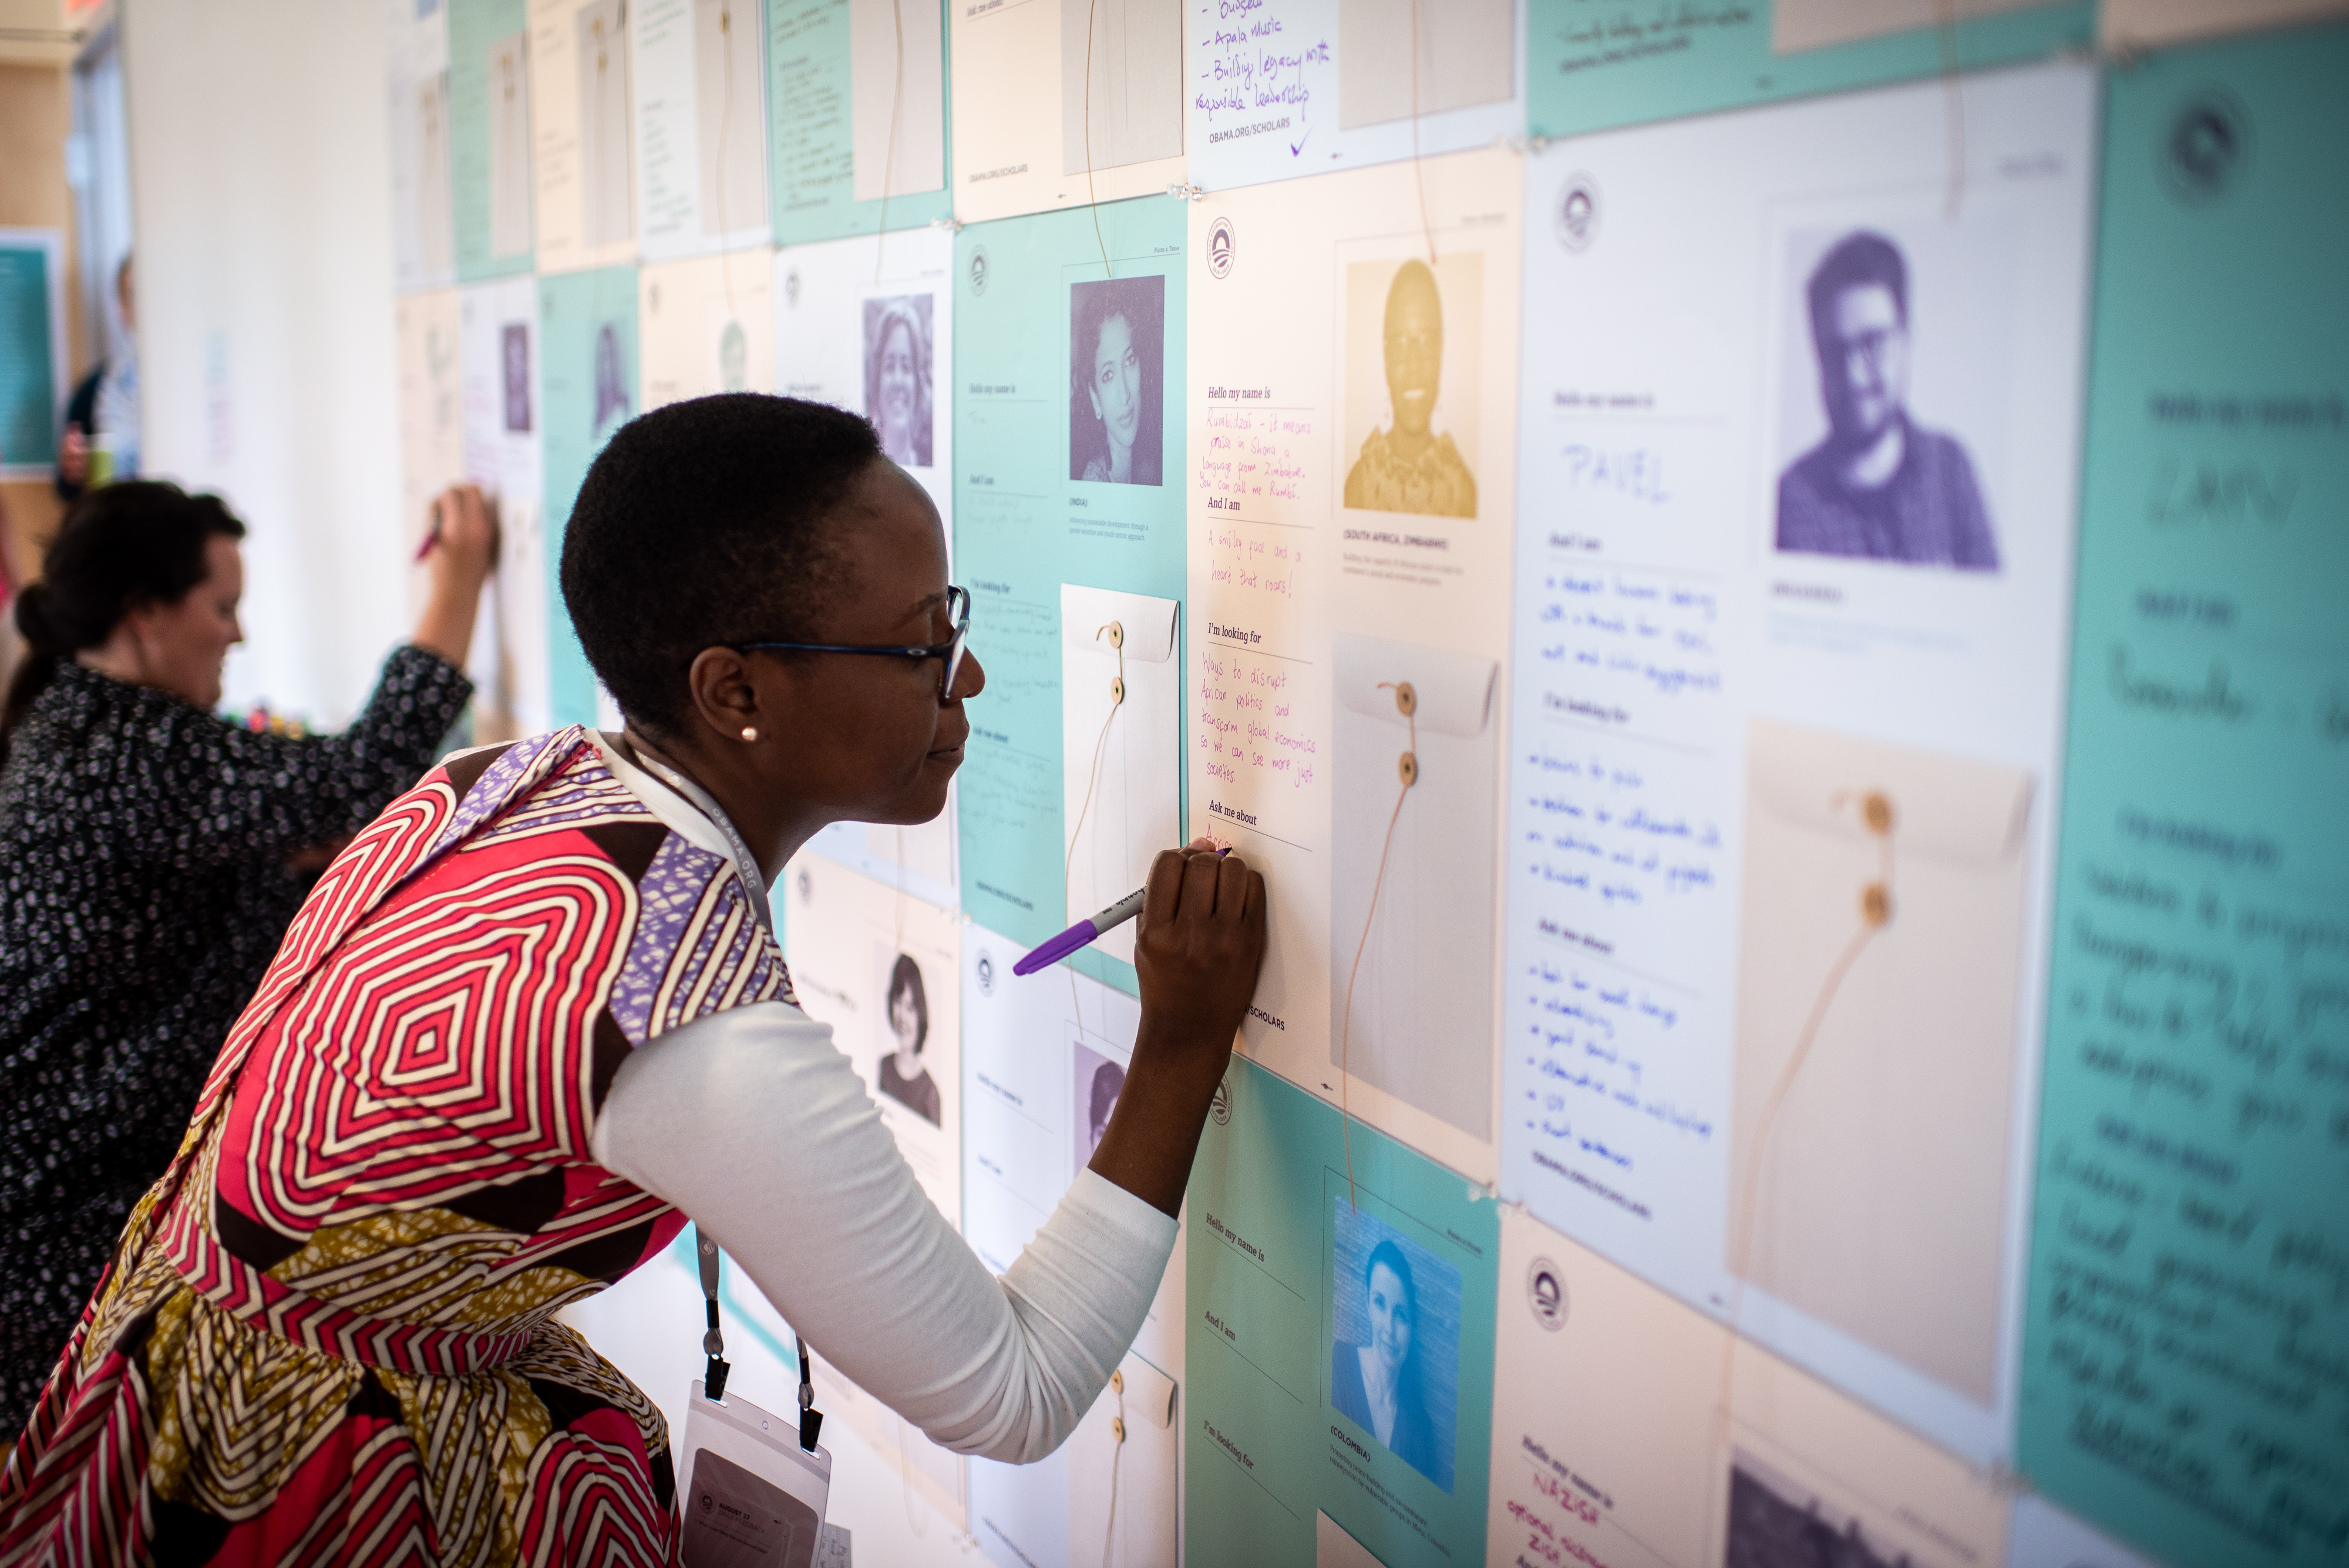 A lady with a deep skin tone wearing a multi-colored dress and a white shirt with 
short black hair and glasses, is writing about herself on a board.